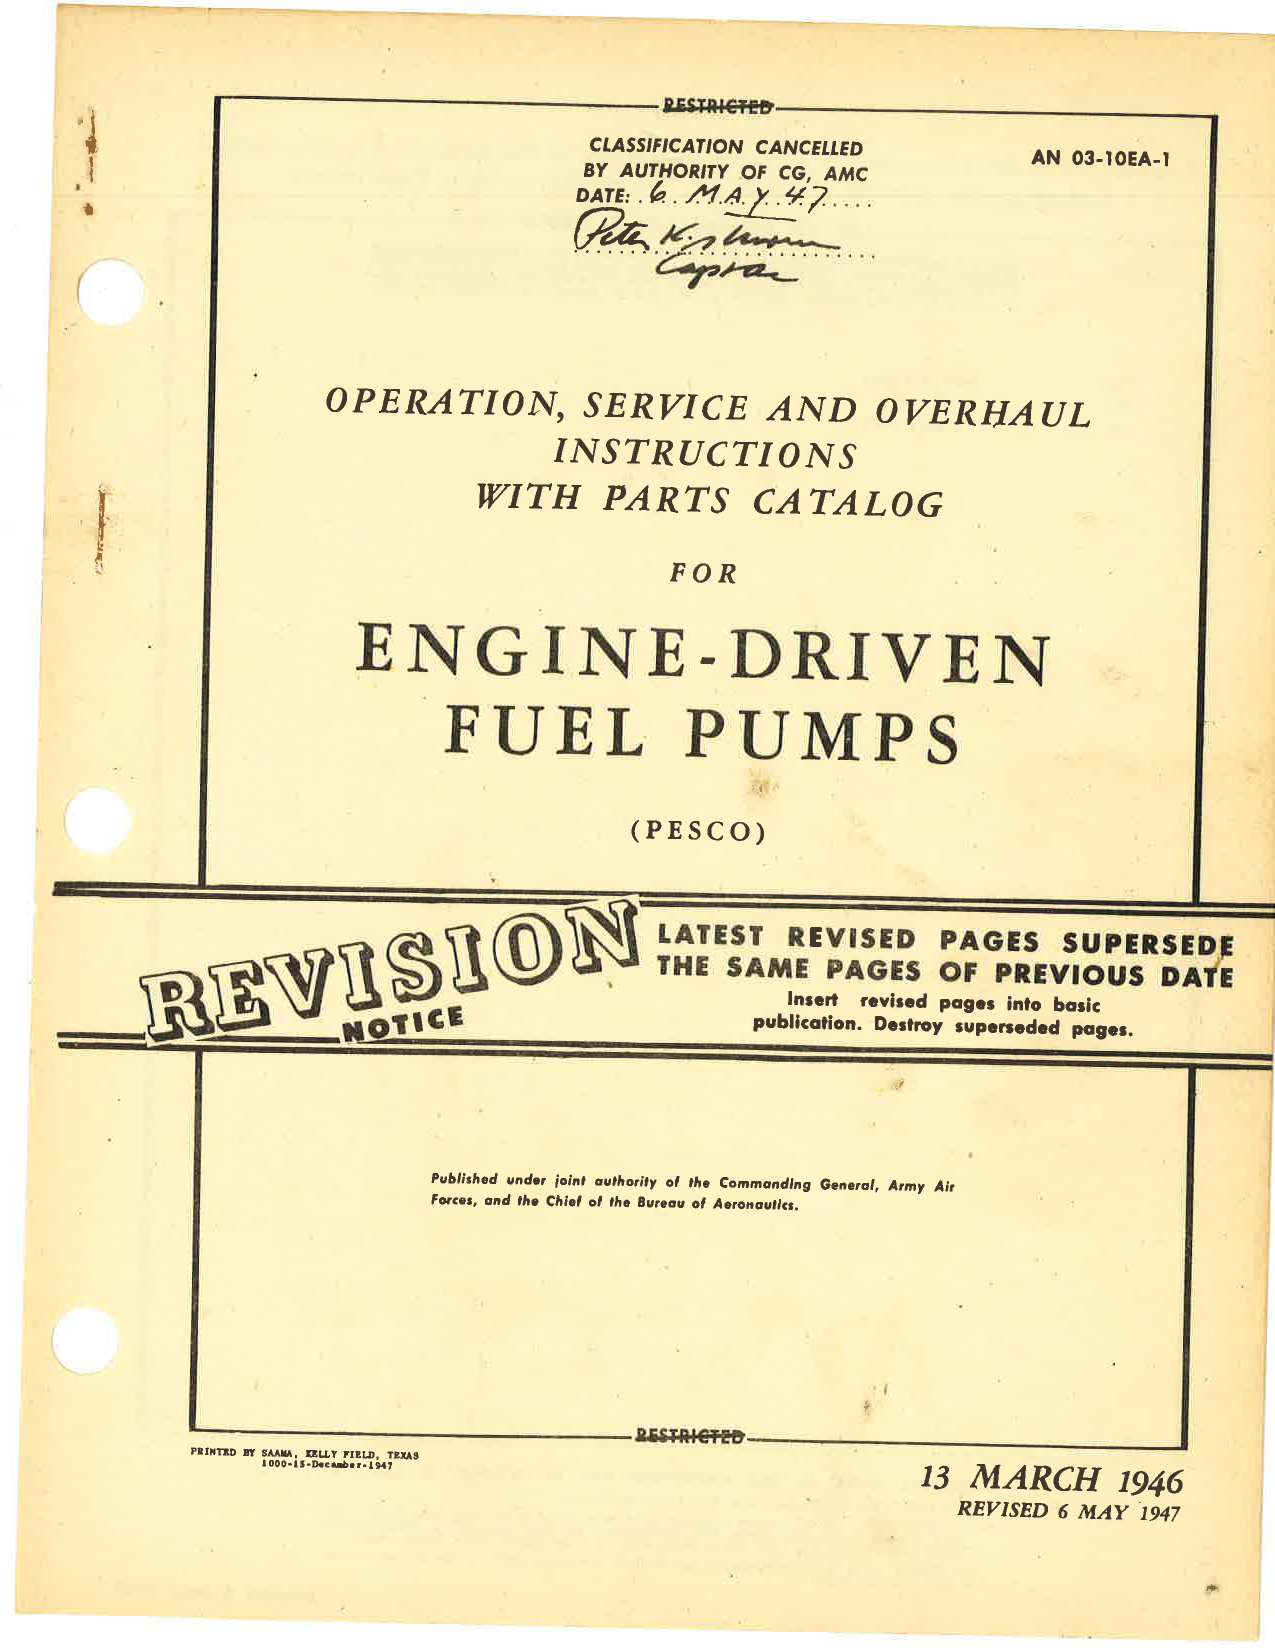 Sample page 1 from AirCorps Library document: Operation, Service, & Overhaul Instructions with Parts Catalog for Engine-Driven Fuel Pumps